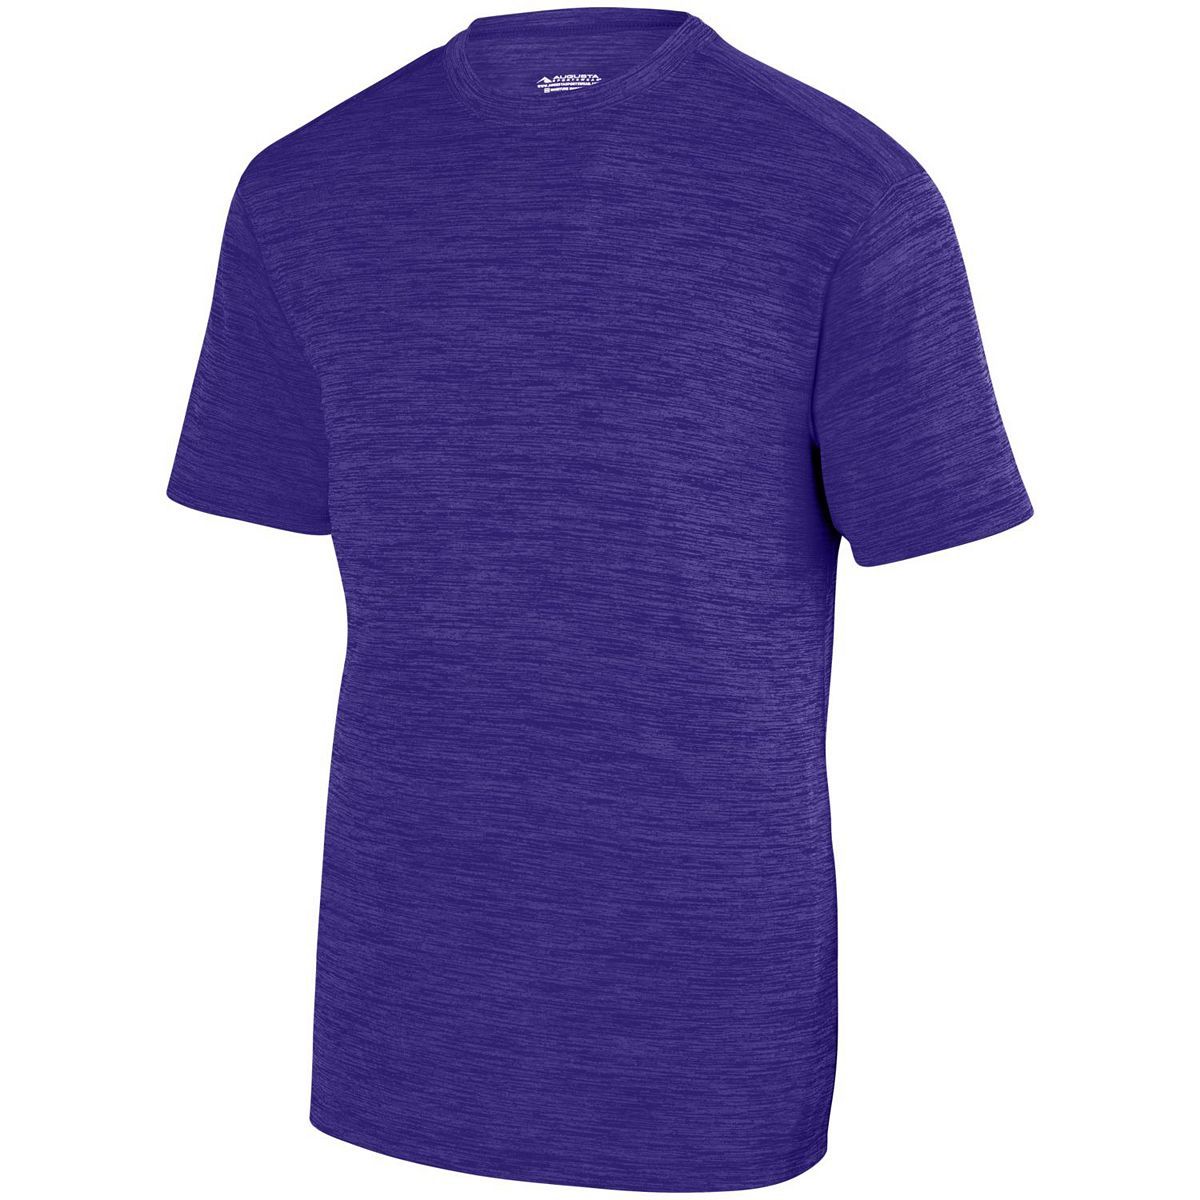 Augusta Sportswear Youth Shadow Tonal Heather Training Tee in Purple  -Part of the Youth, Youth-Tee-Shirt, T-Shirts, Augusta-Products, Shirts, Tonal-Fleece-Collection product lines at KanaleyCreations.com